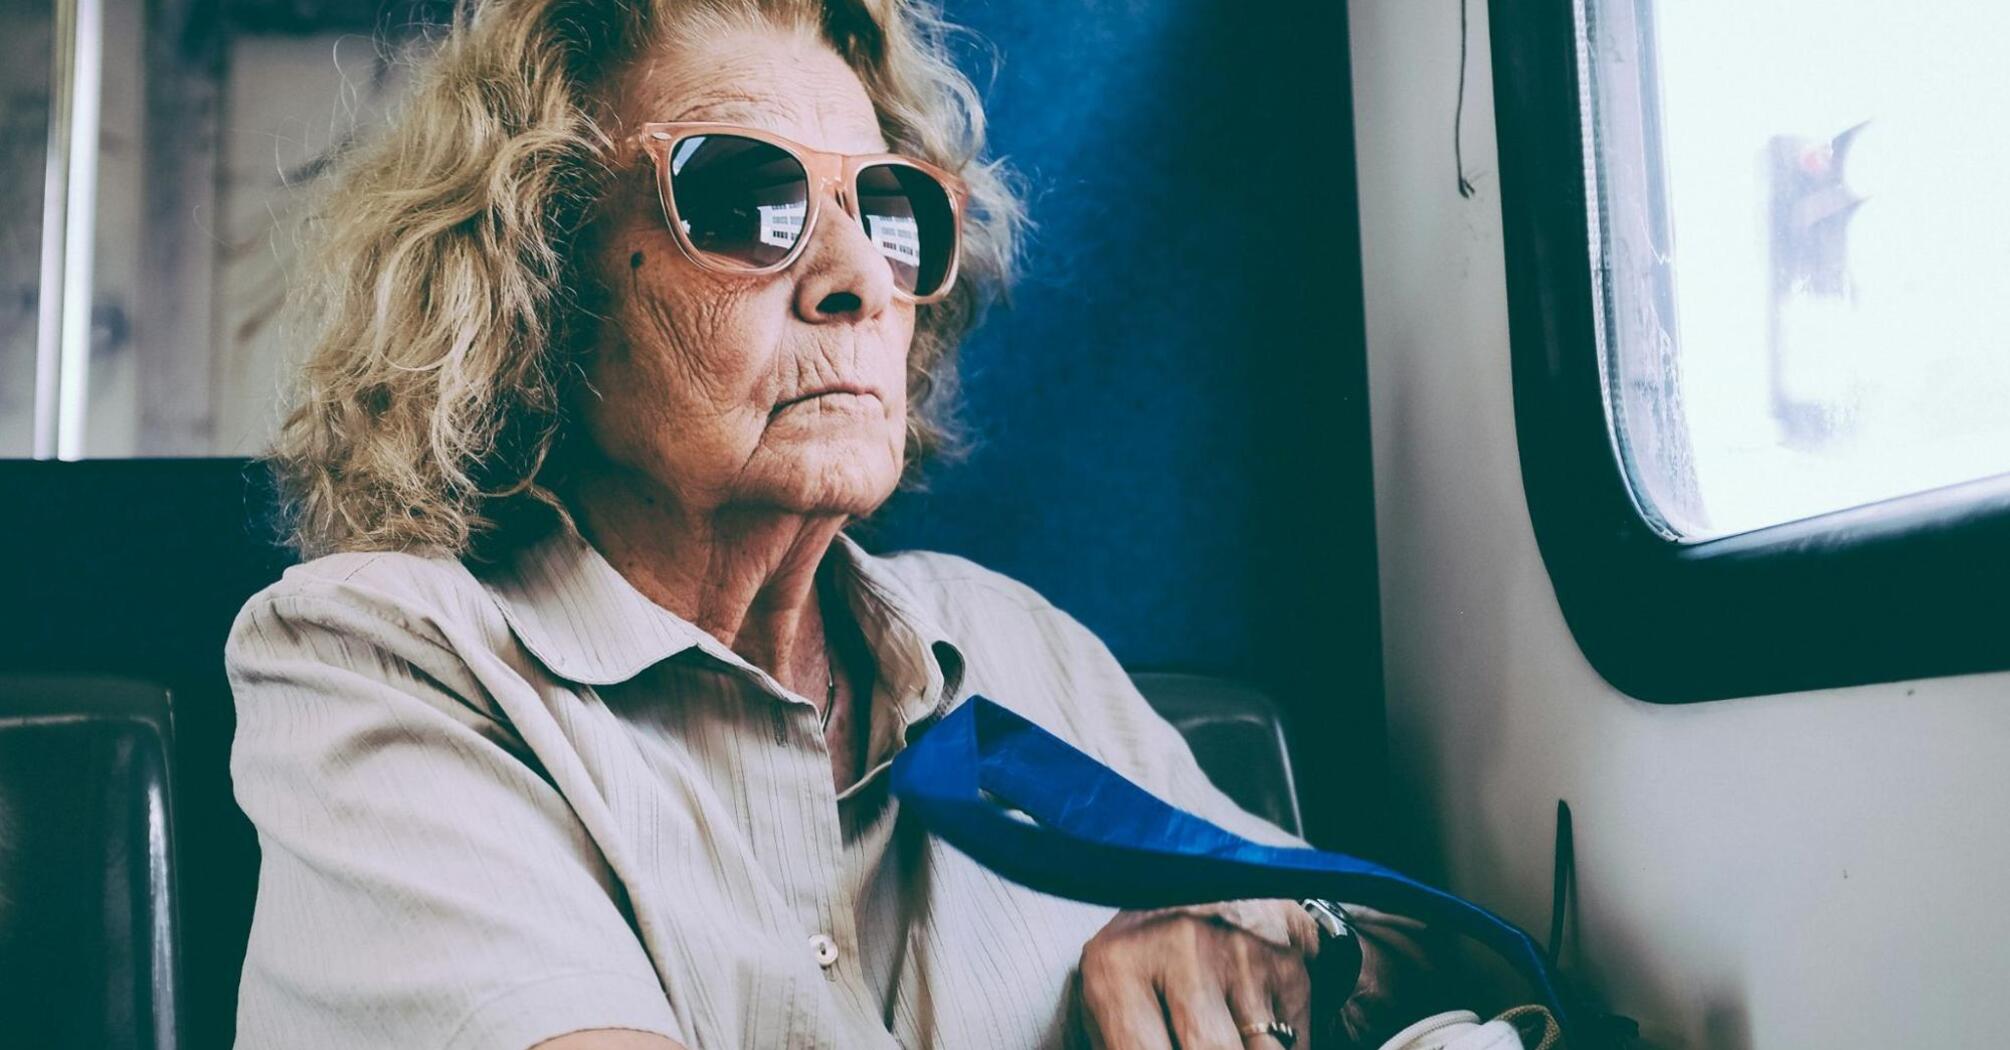 An elderly woman wearing sunglasses sits on a bus, looking out the window